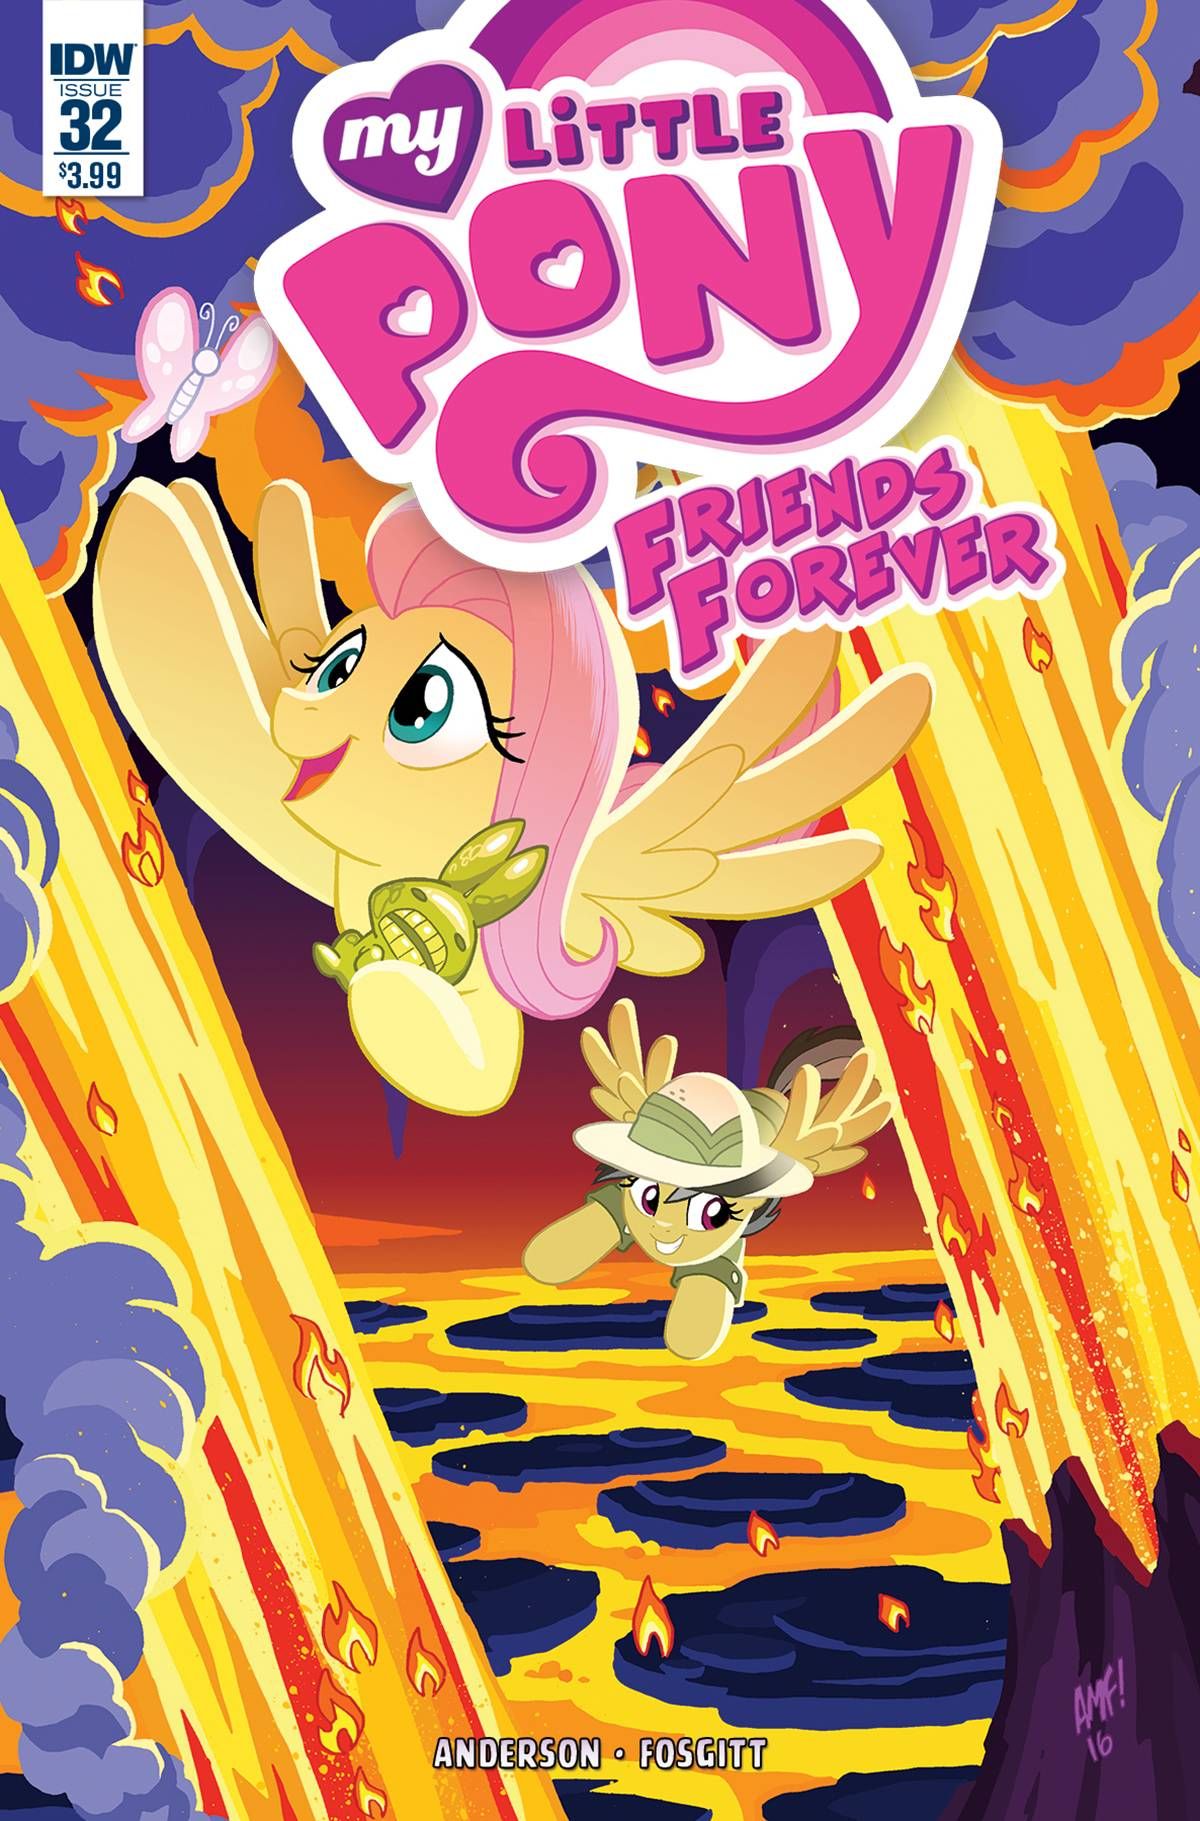 My Little Pony Friends Forever #32 Comic